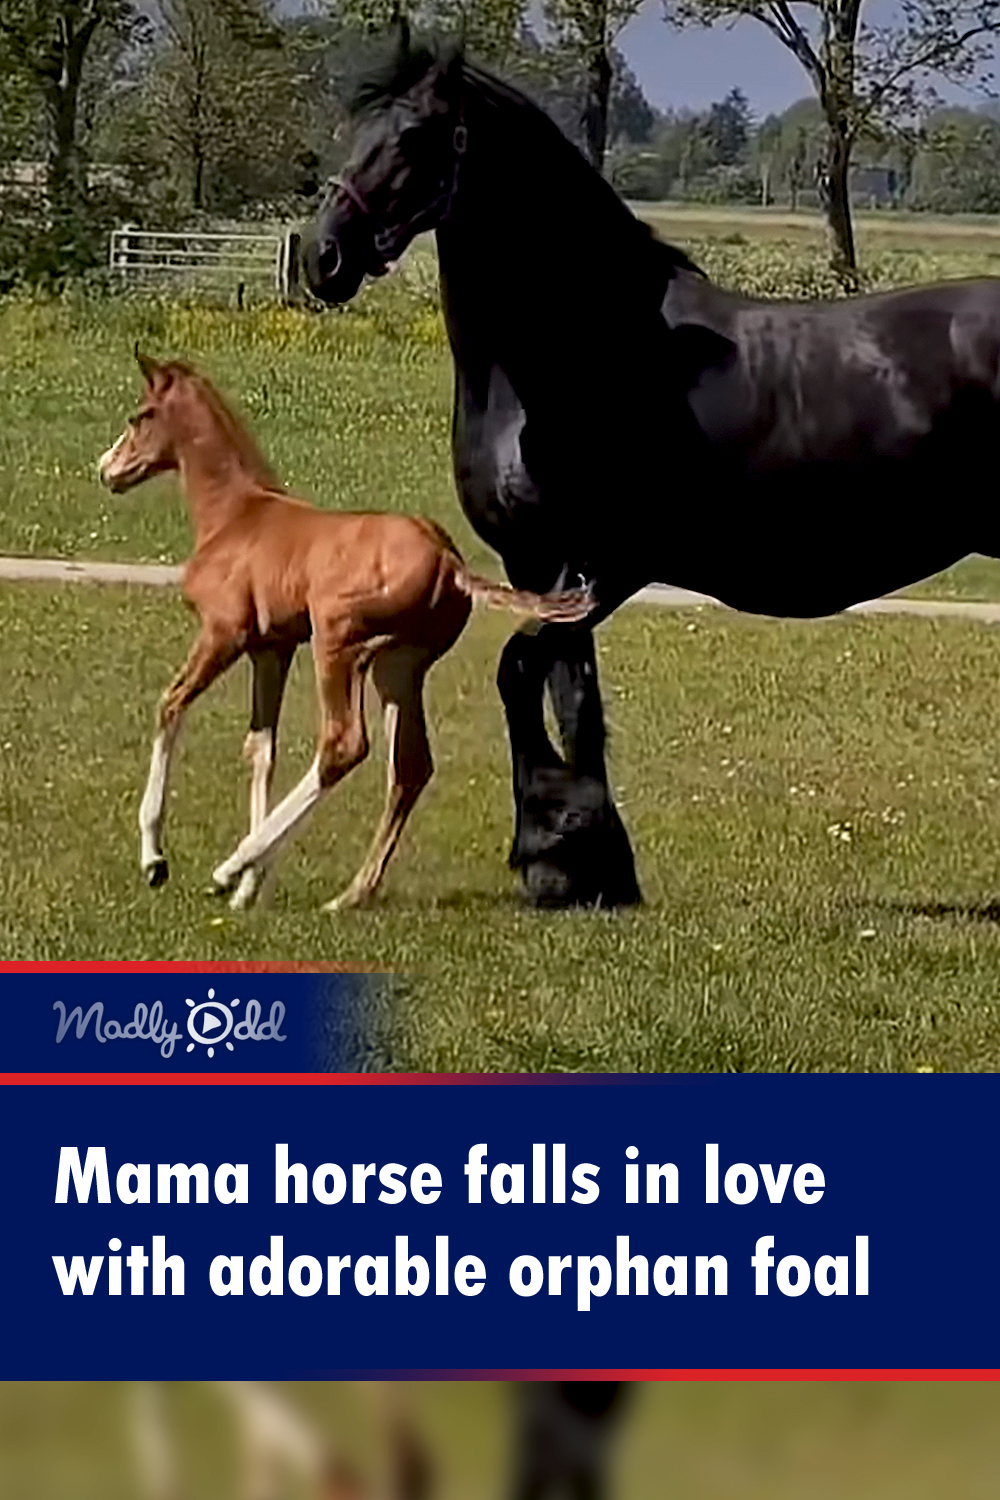 Mama horse falls in love with adorable orphan foal